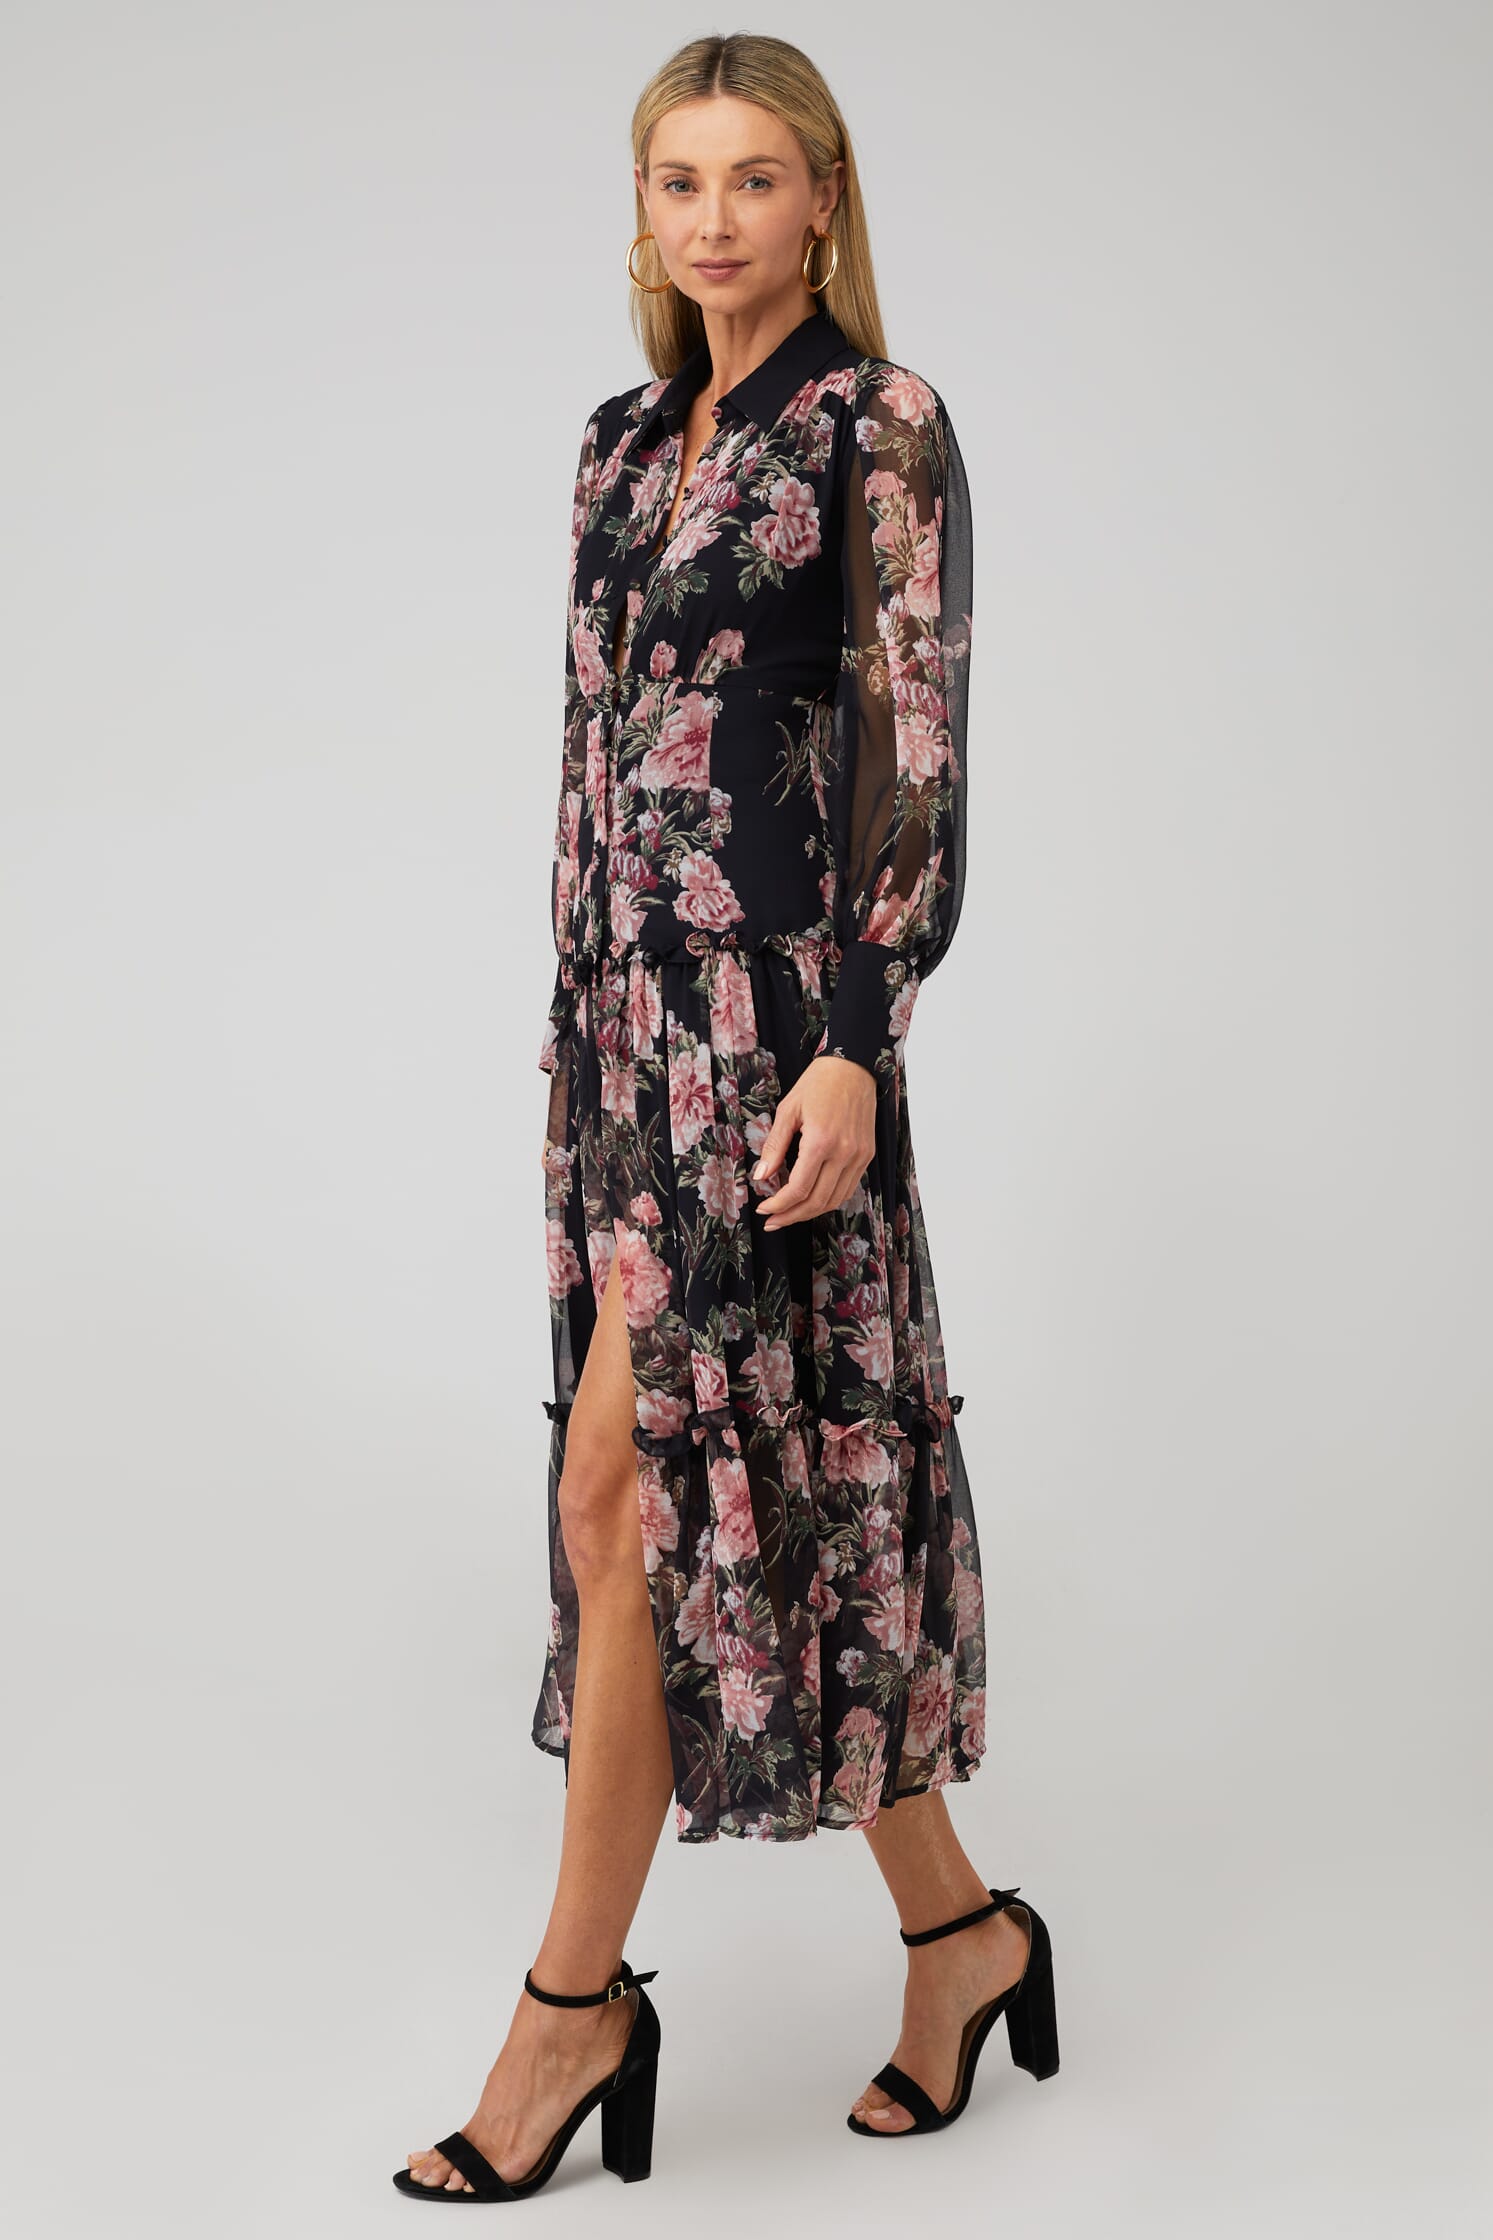 Bardot | Navy Floral Dress in Navy/Floral| FashionPass